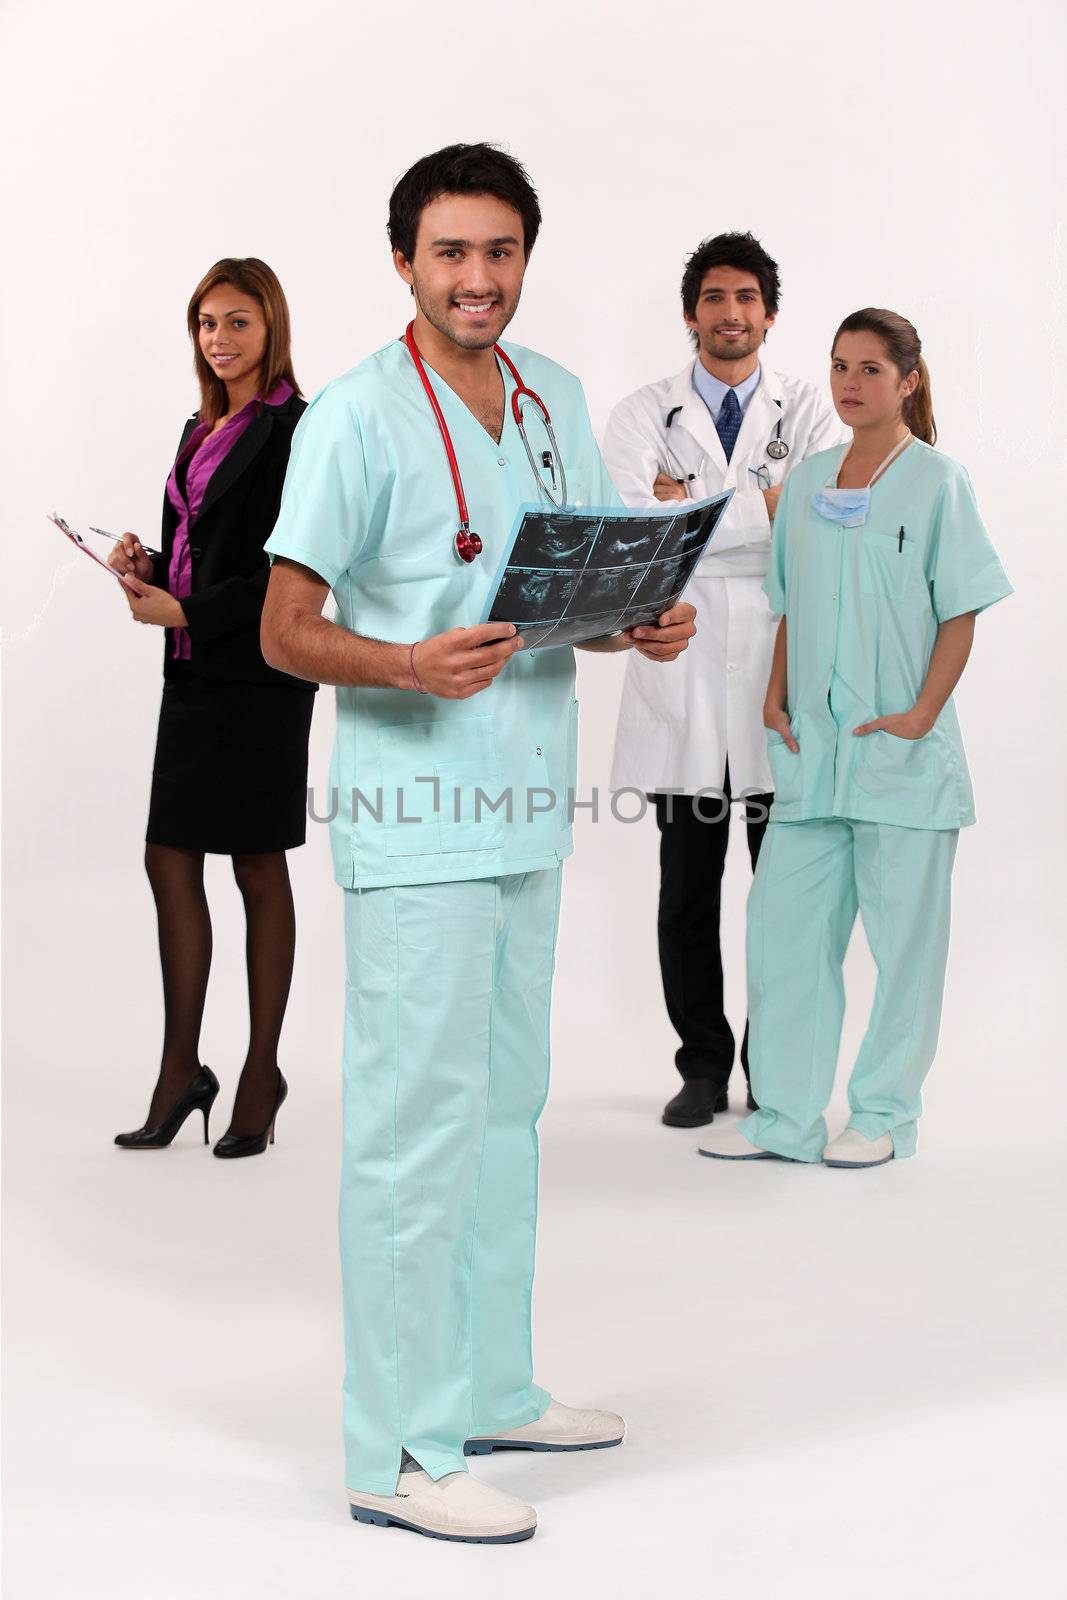 Medical staff by phovoir